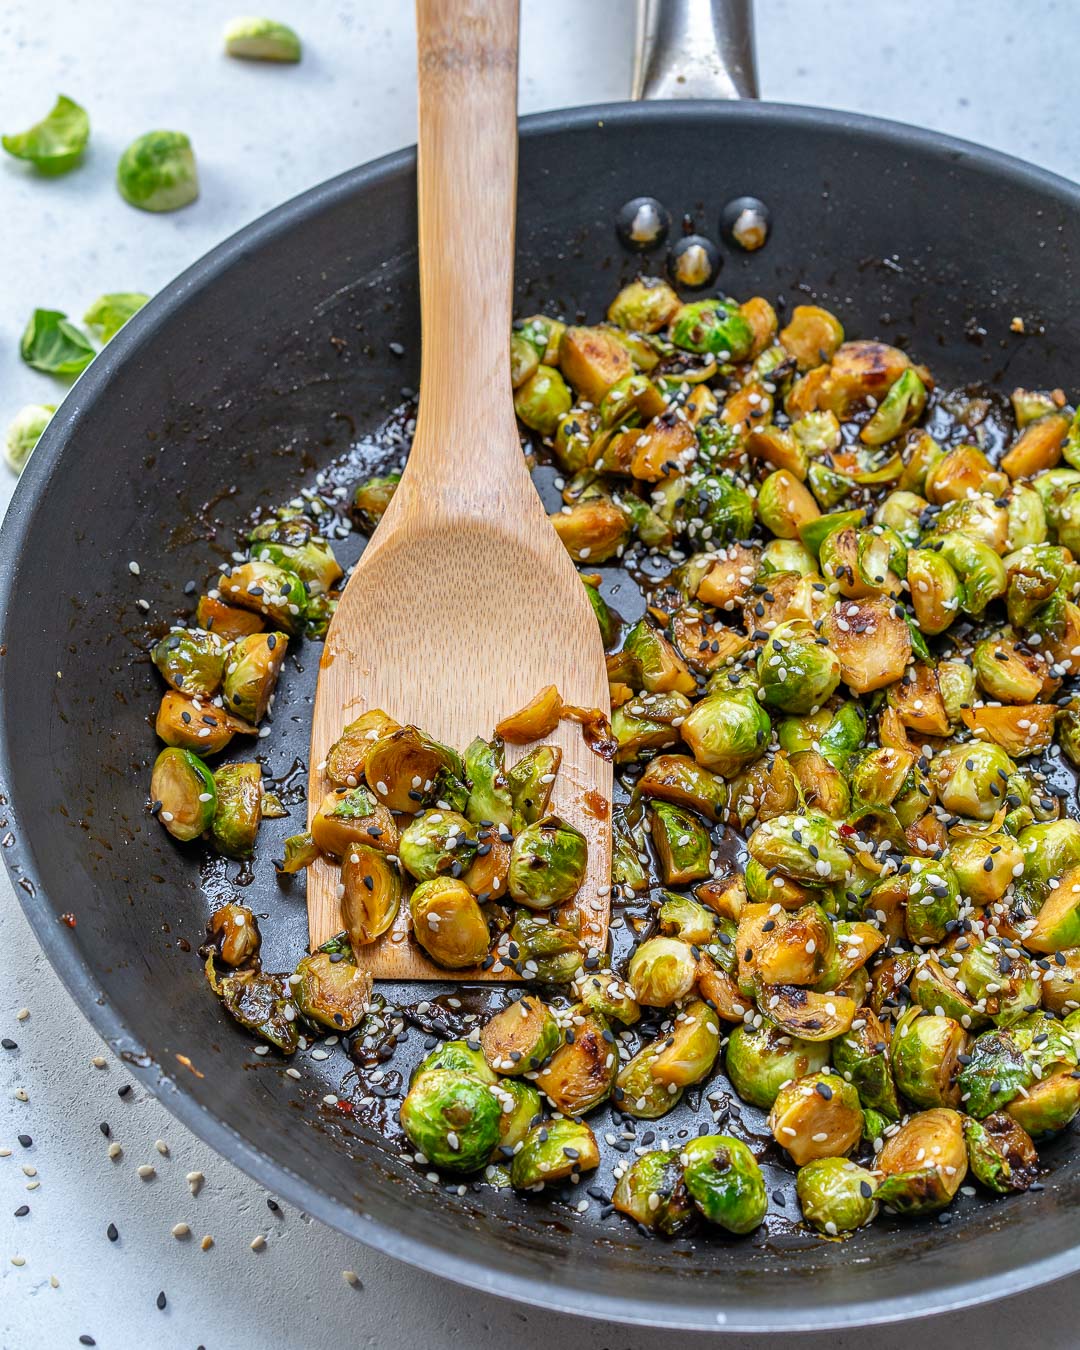 Tasty Stir Fried Brussels Sprouts